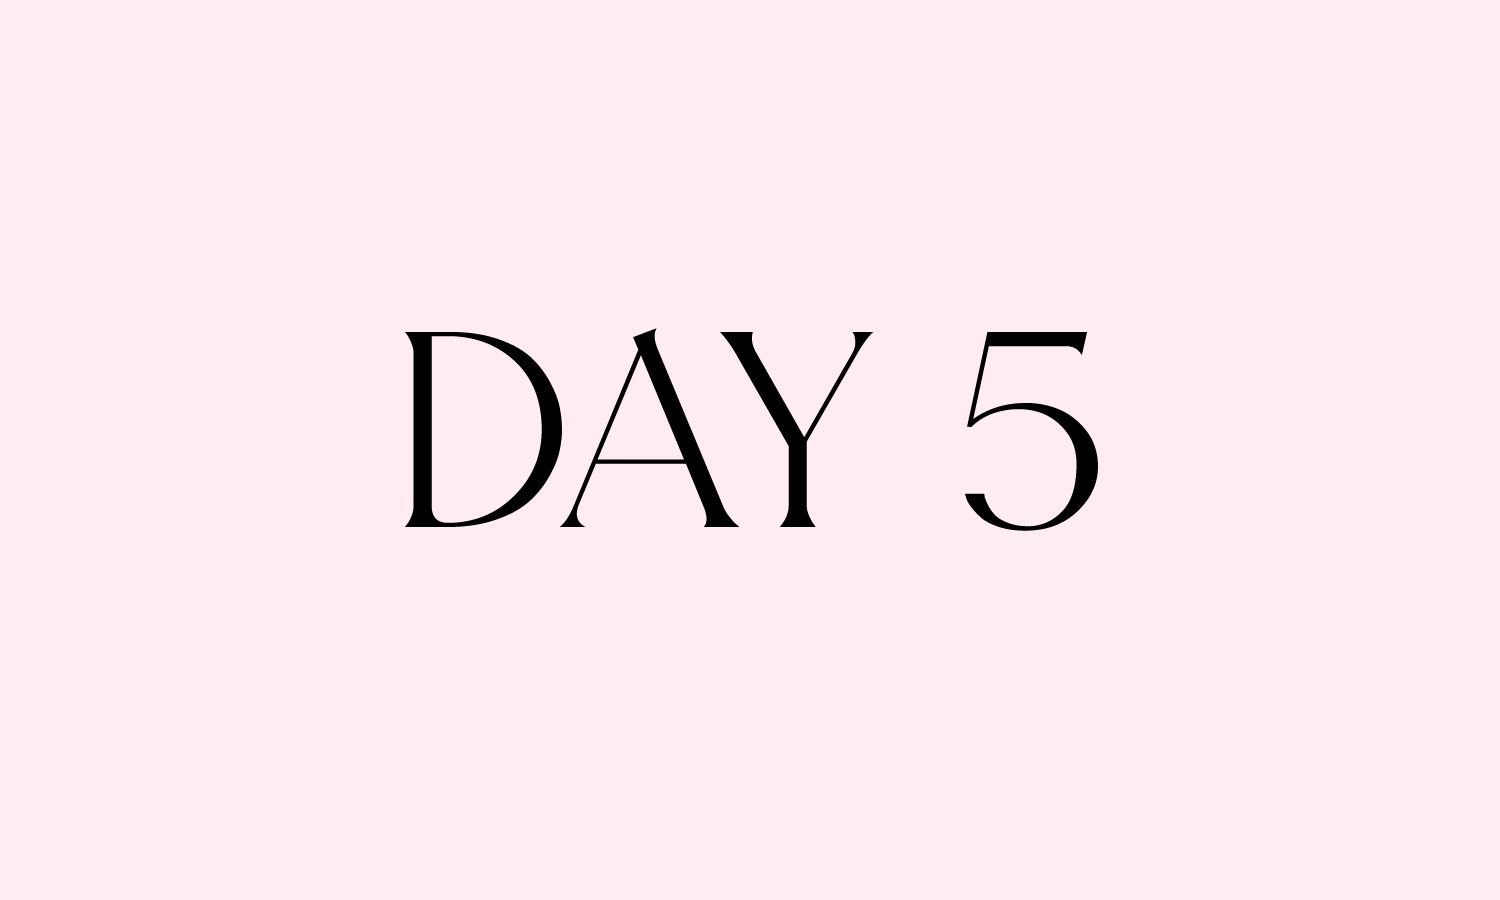 Day 5